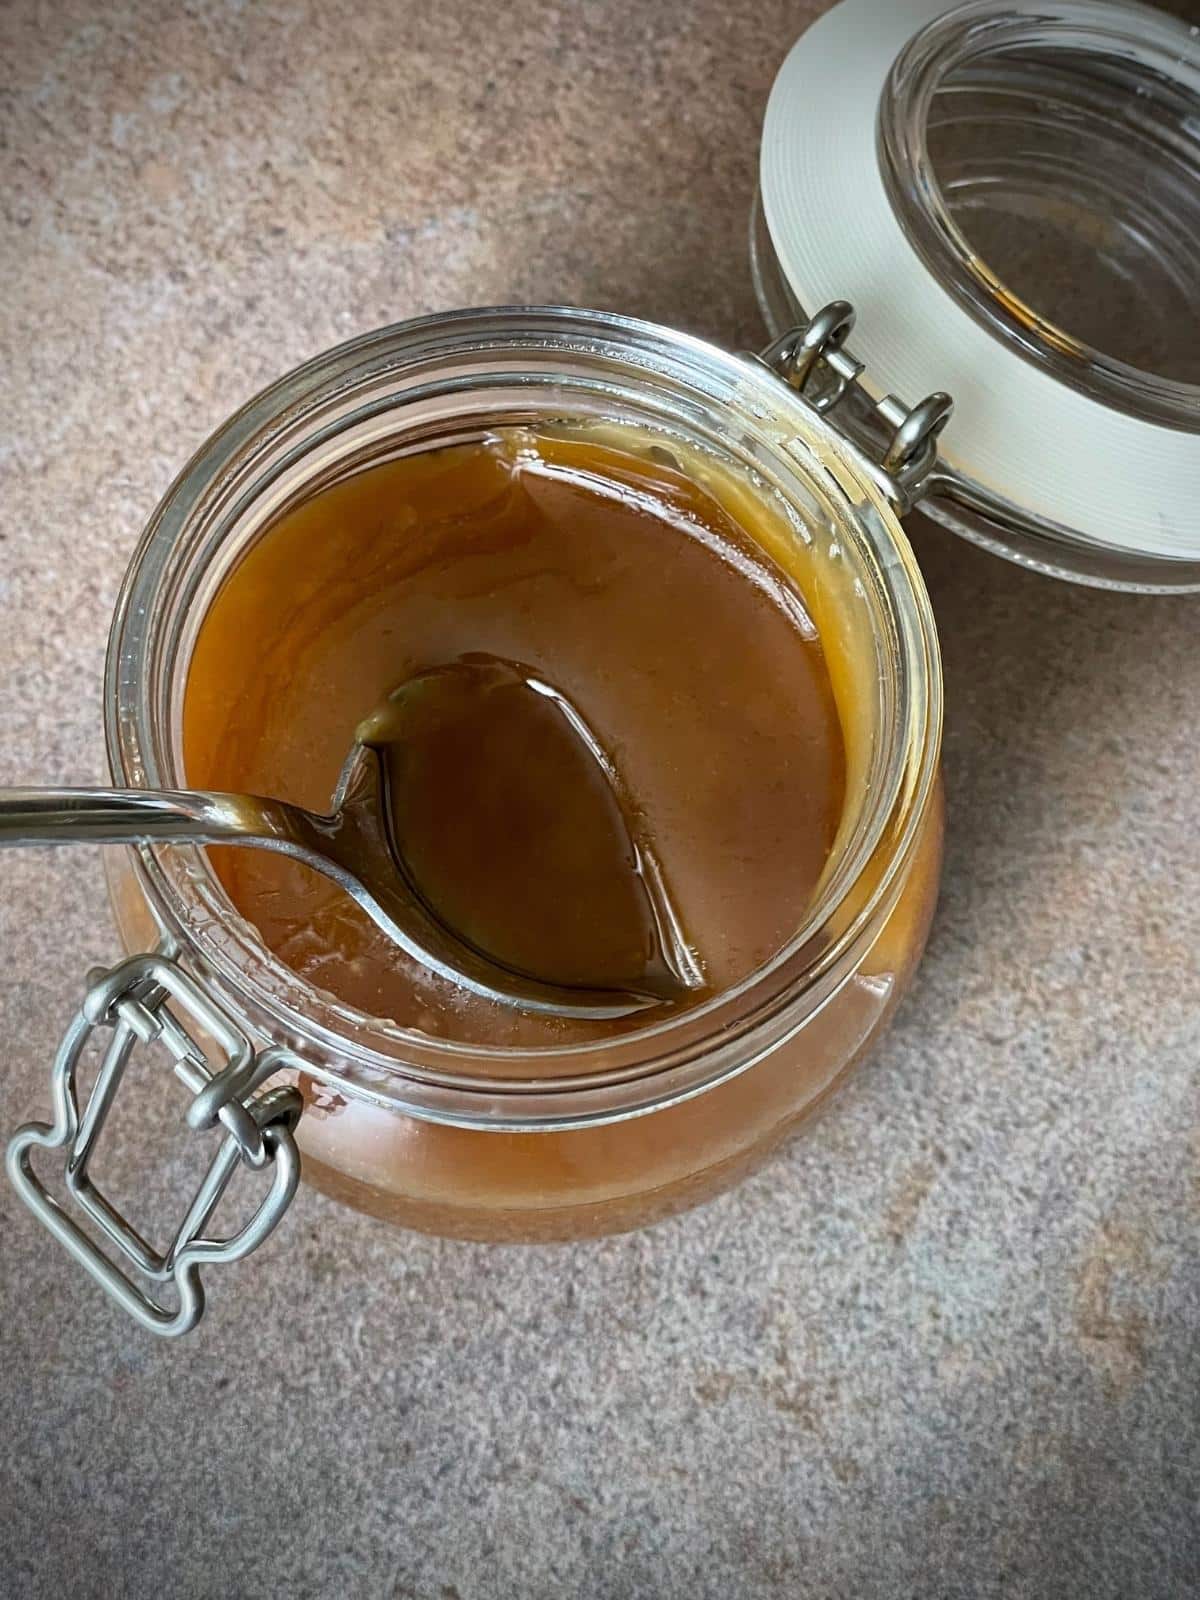 Butterscotch sauce with a spoon in it.